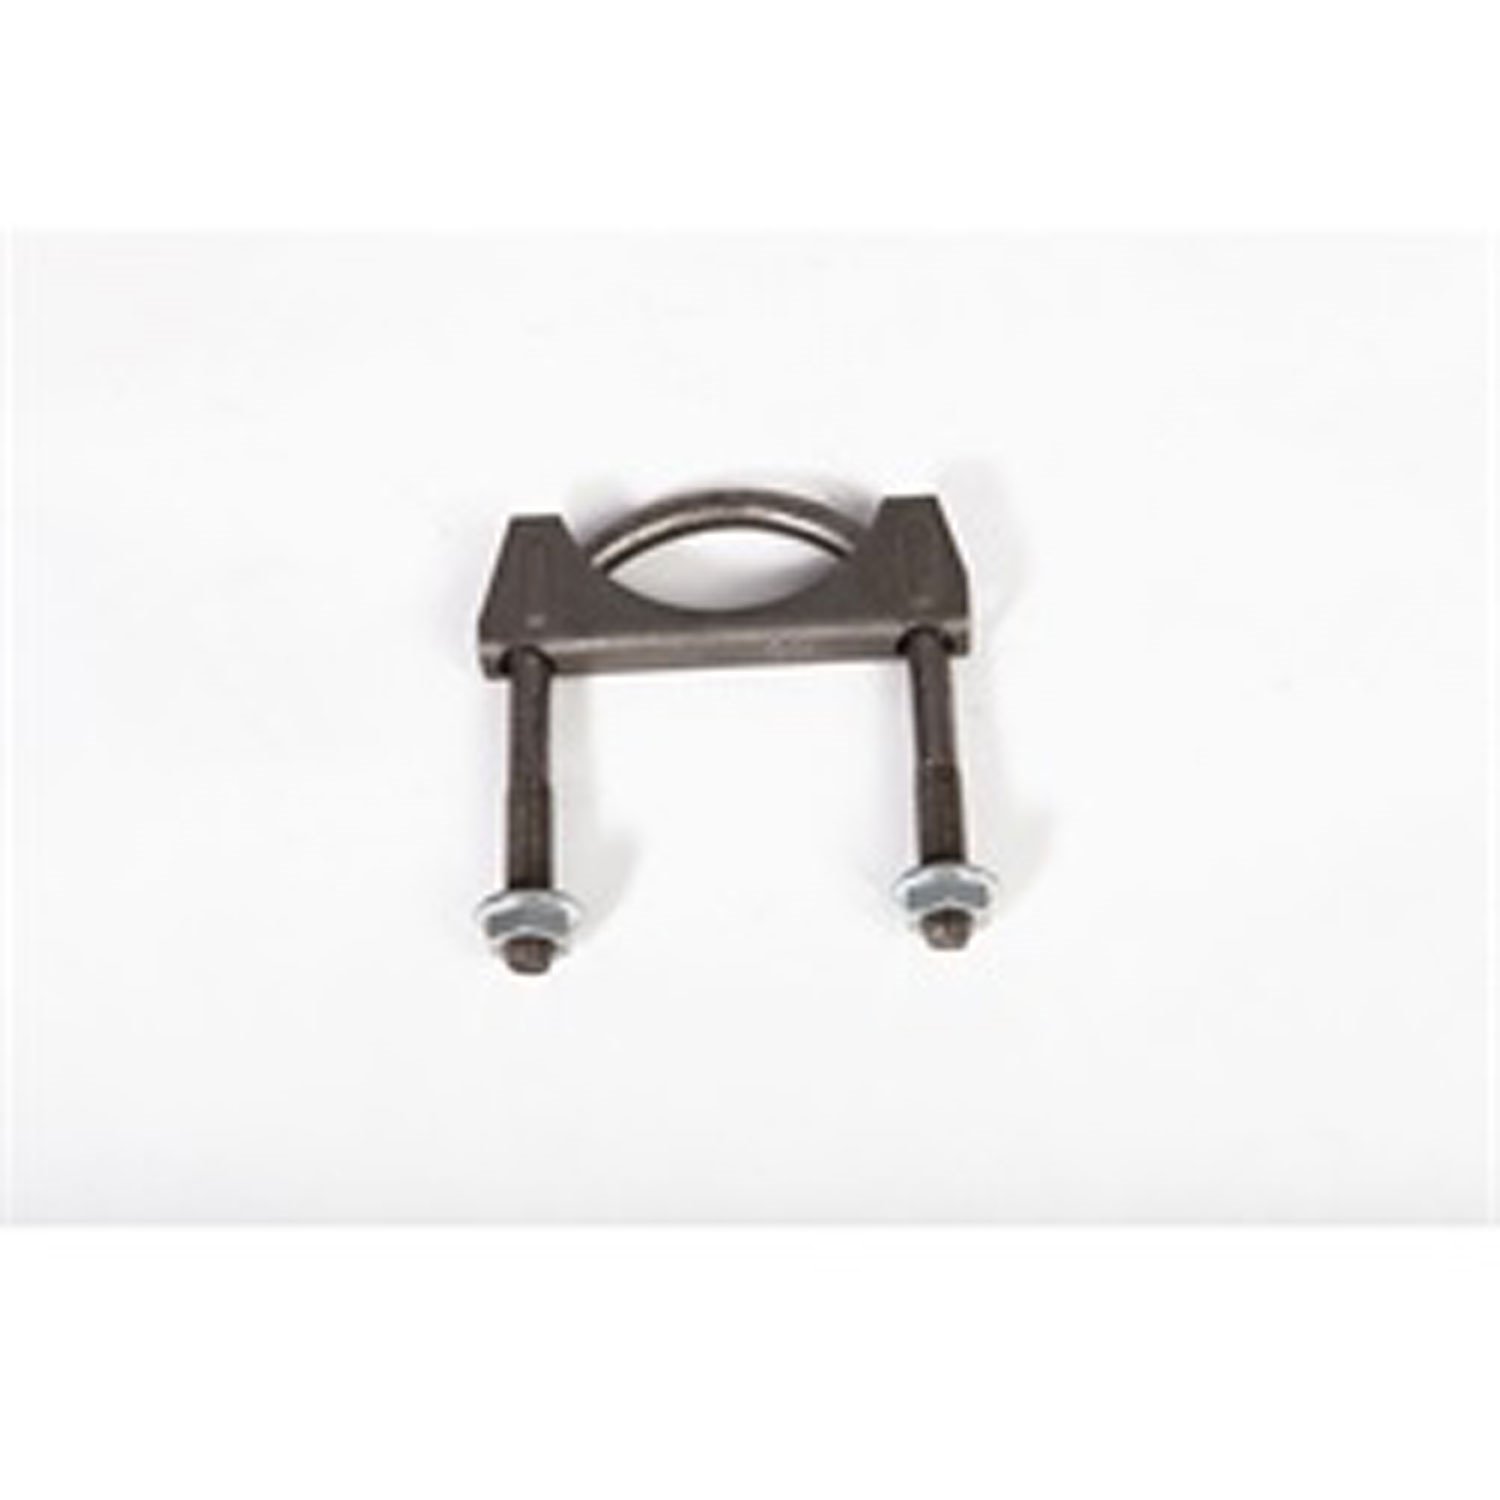 Exhaust Clamp 2-1/8 Inch By Omix-ADA